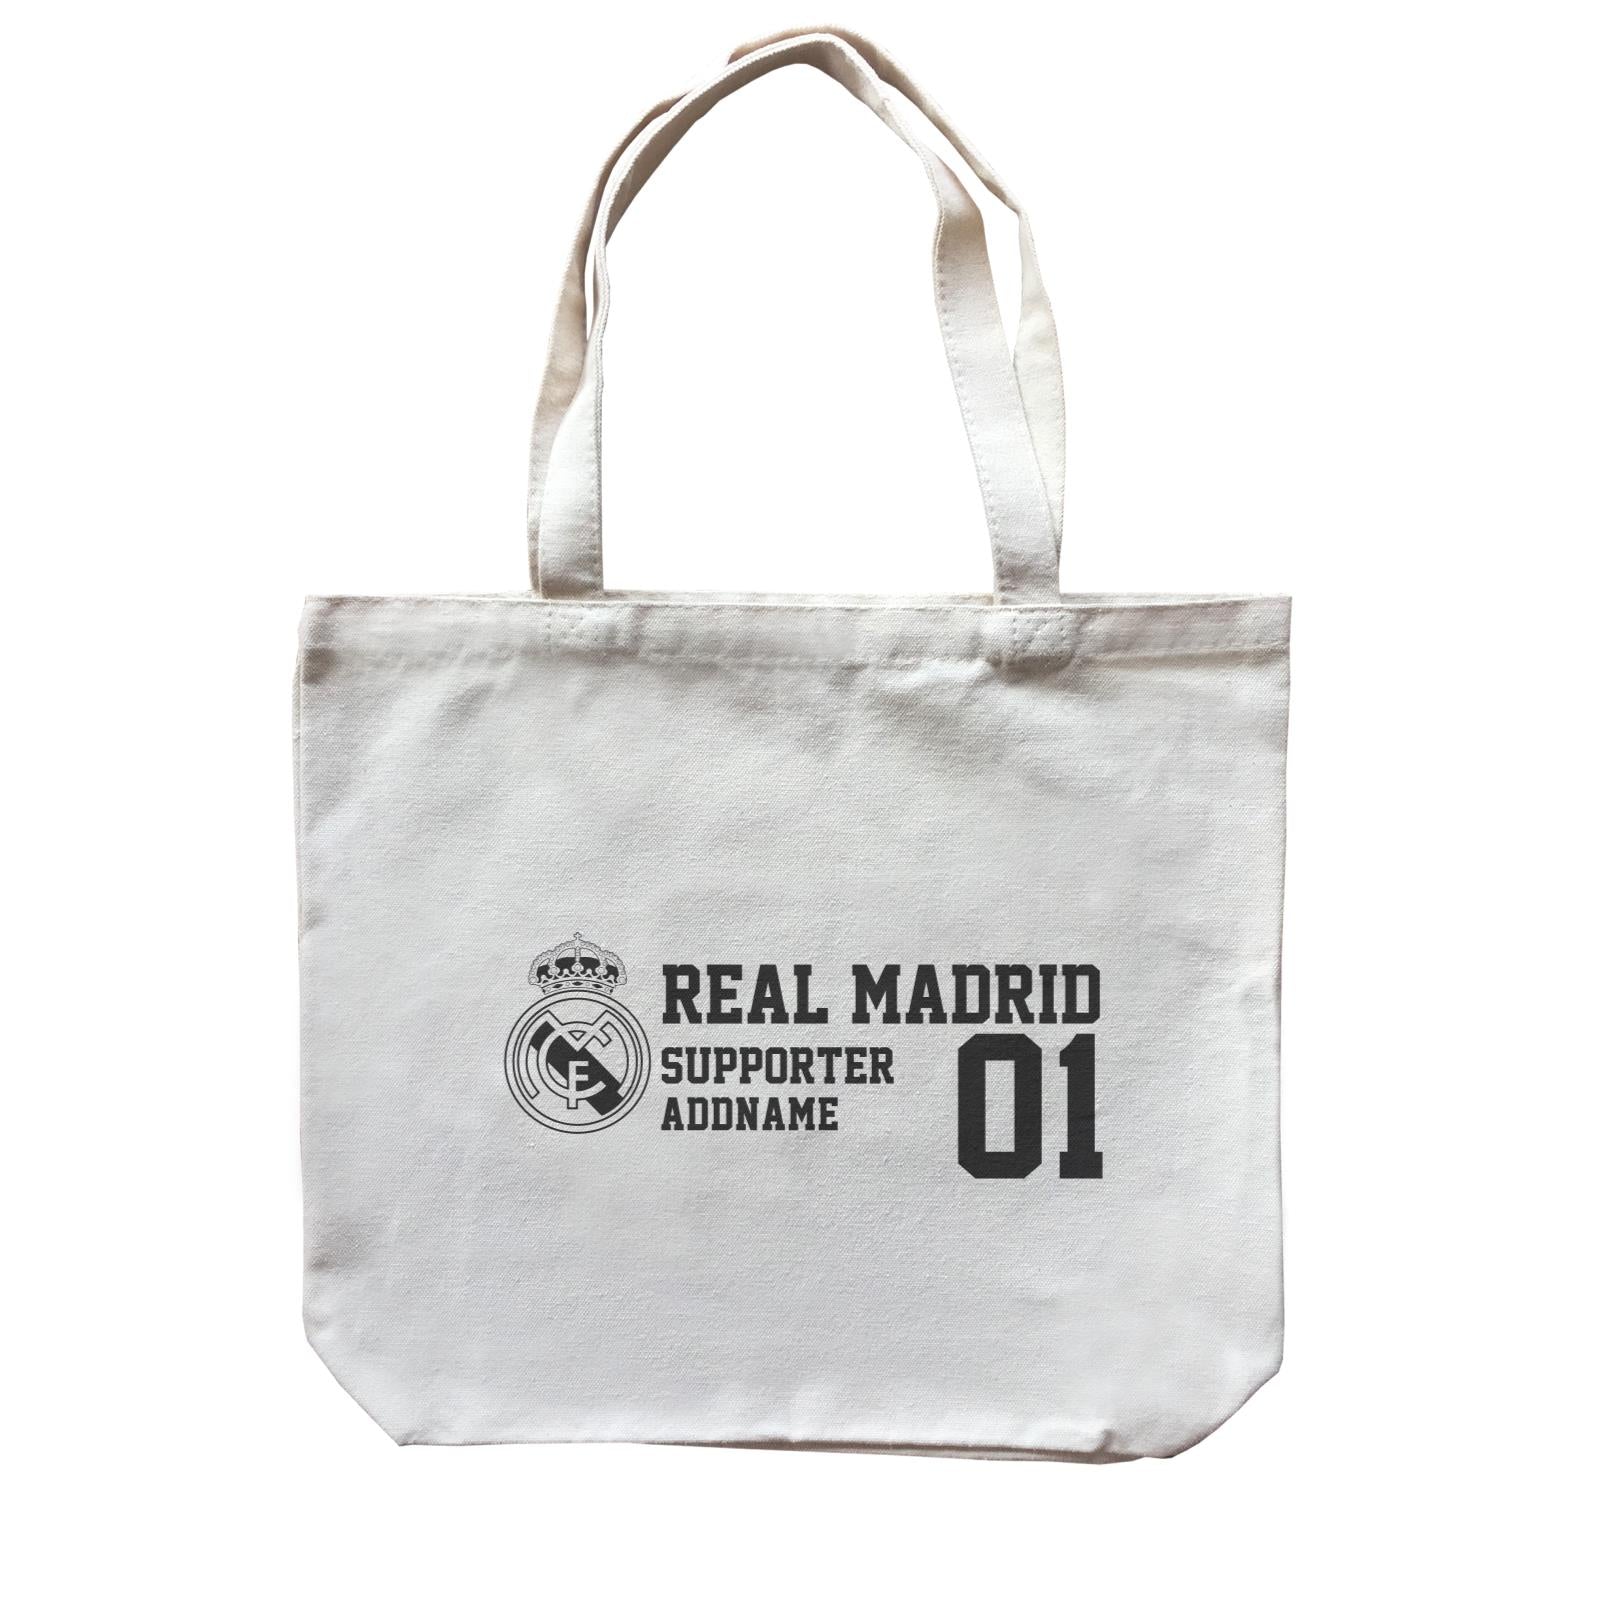 Real Madrid Football Supporter Accessories Addname Canvas Bag